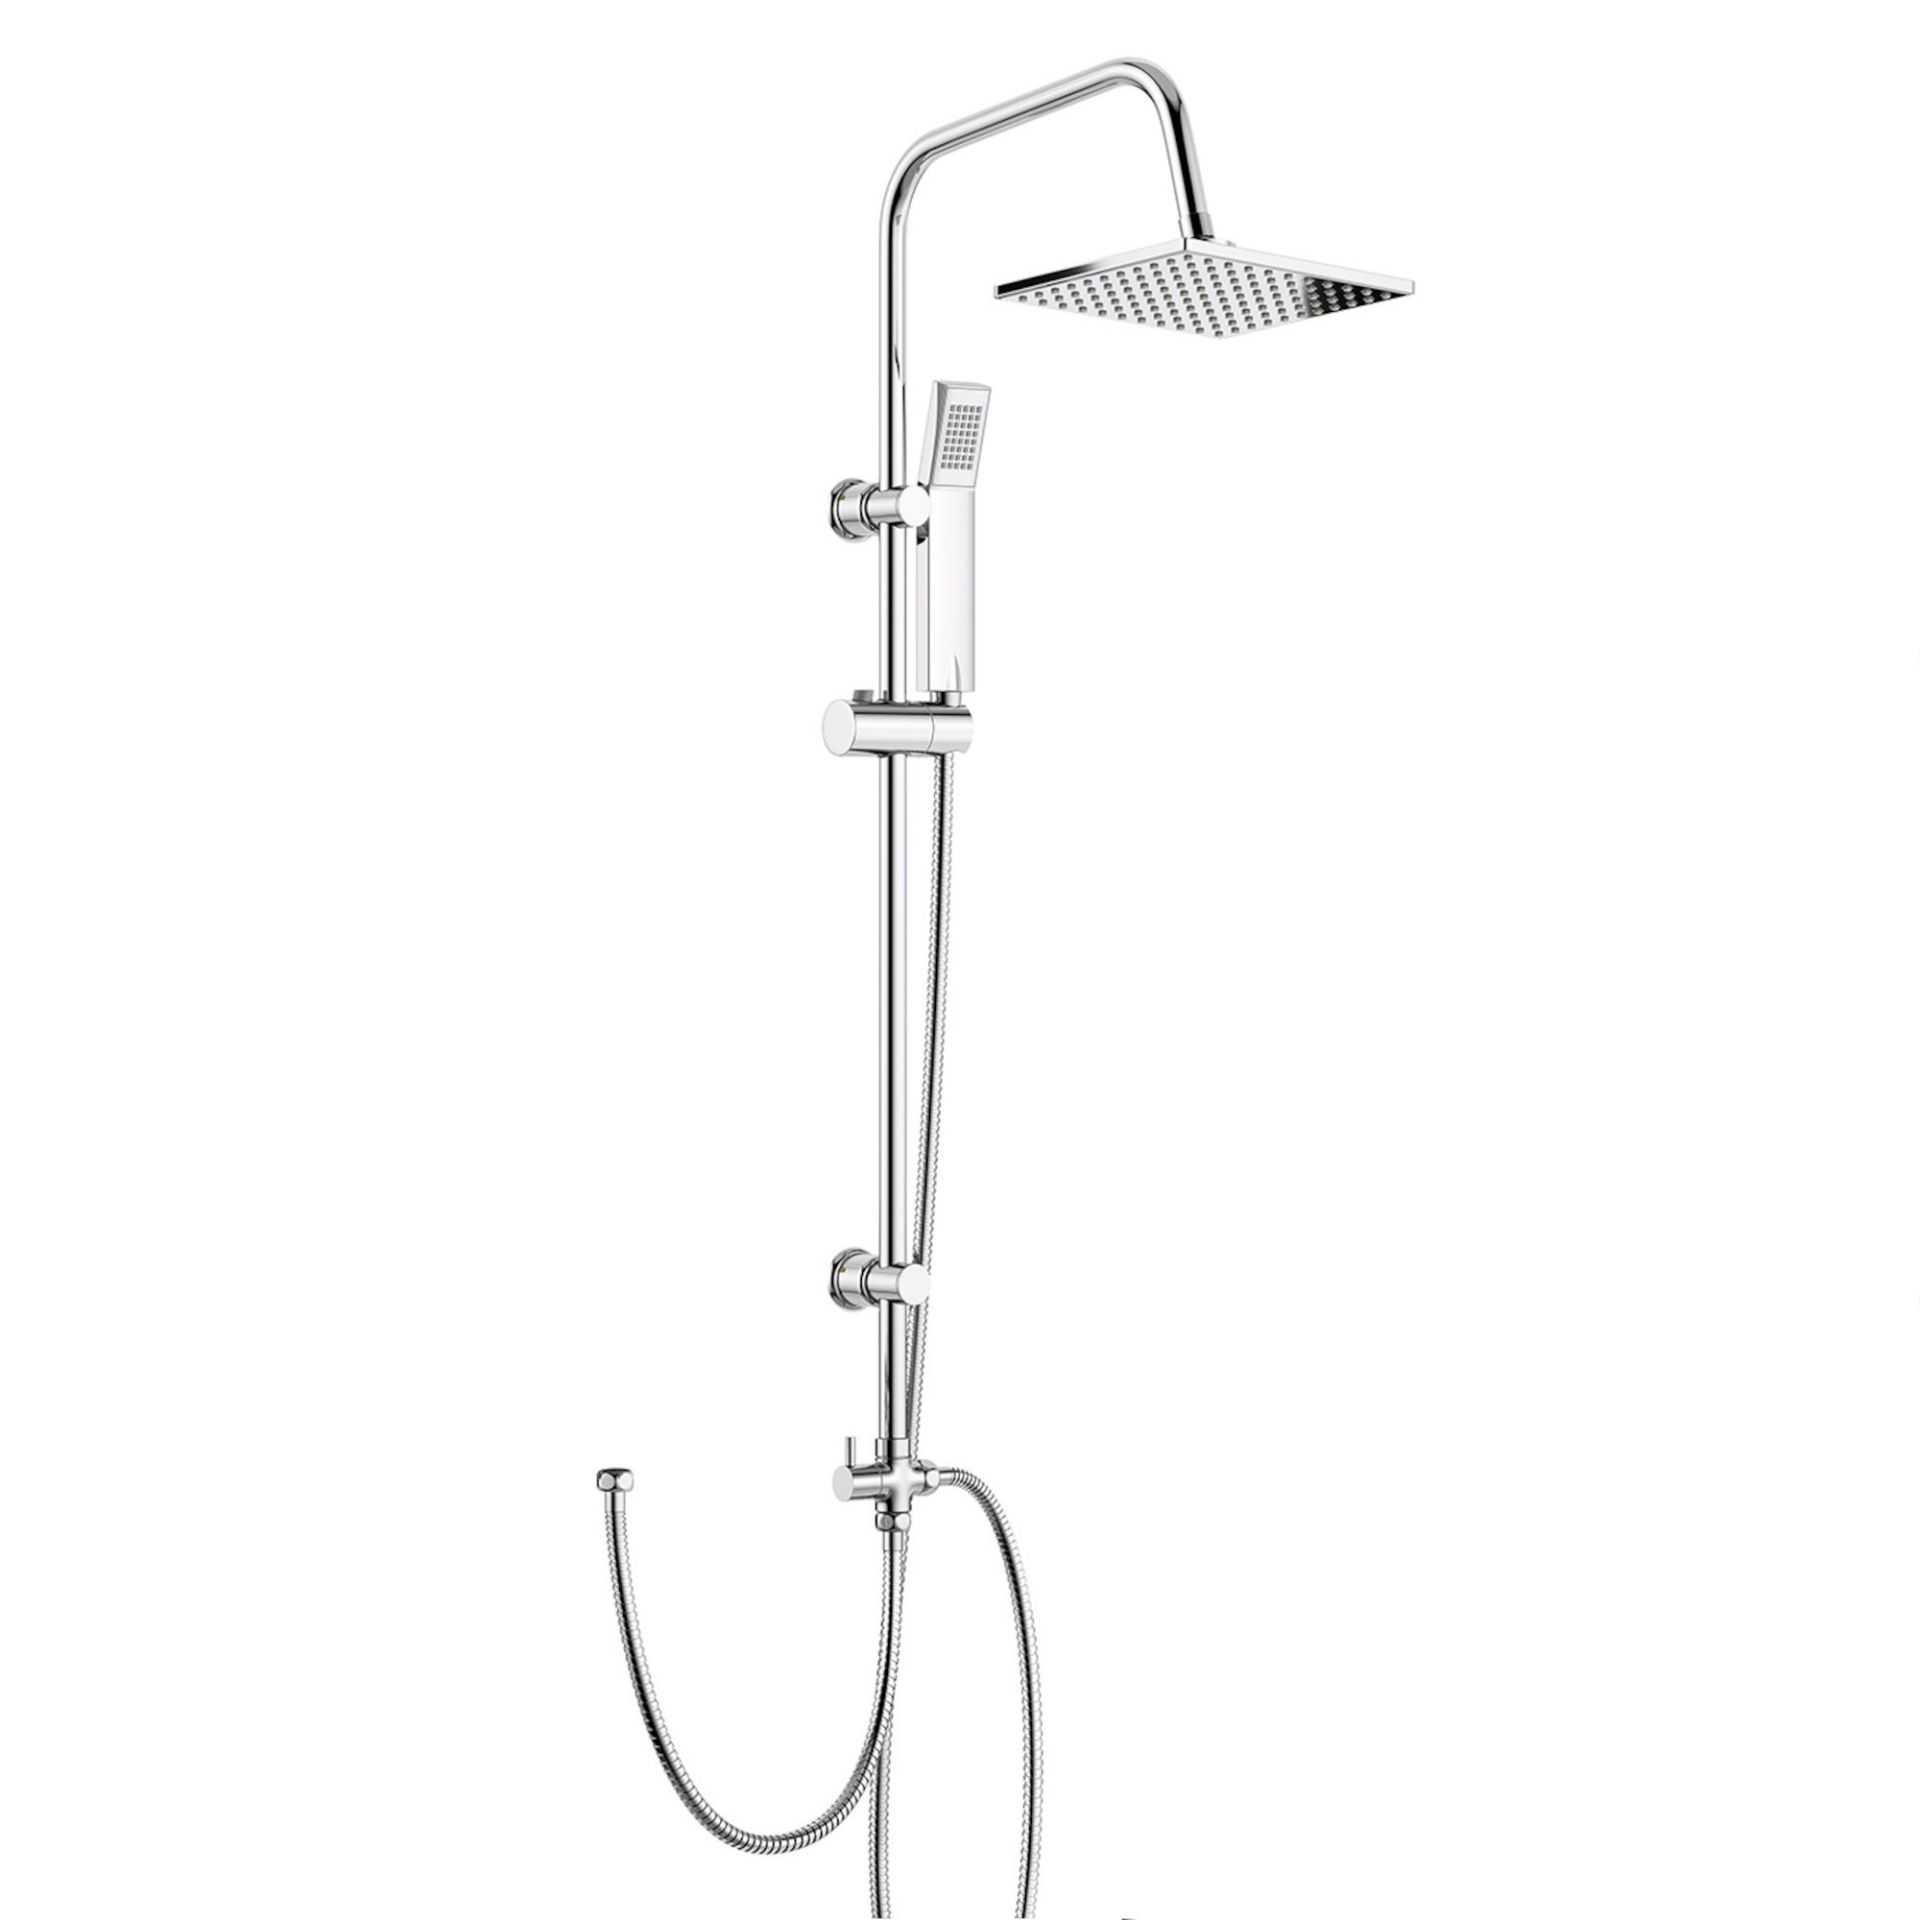 200mm Square Head, Riser Rail & Handheld Kit Quality stainless steel shower head with Easy Cle... - Image 2 of 3